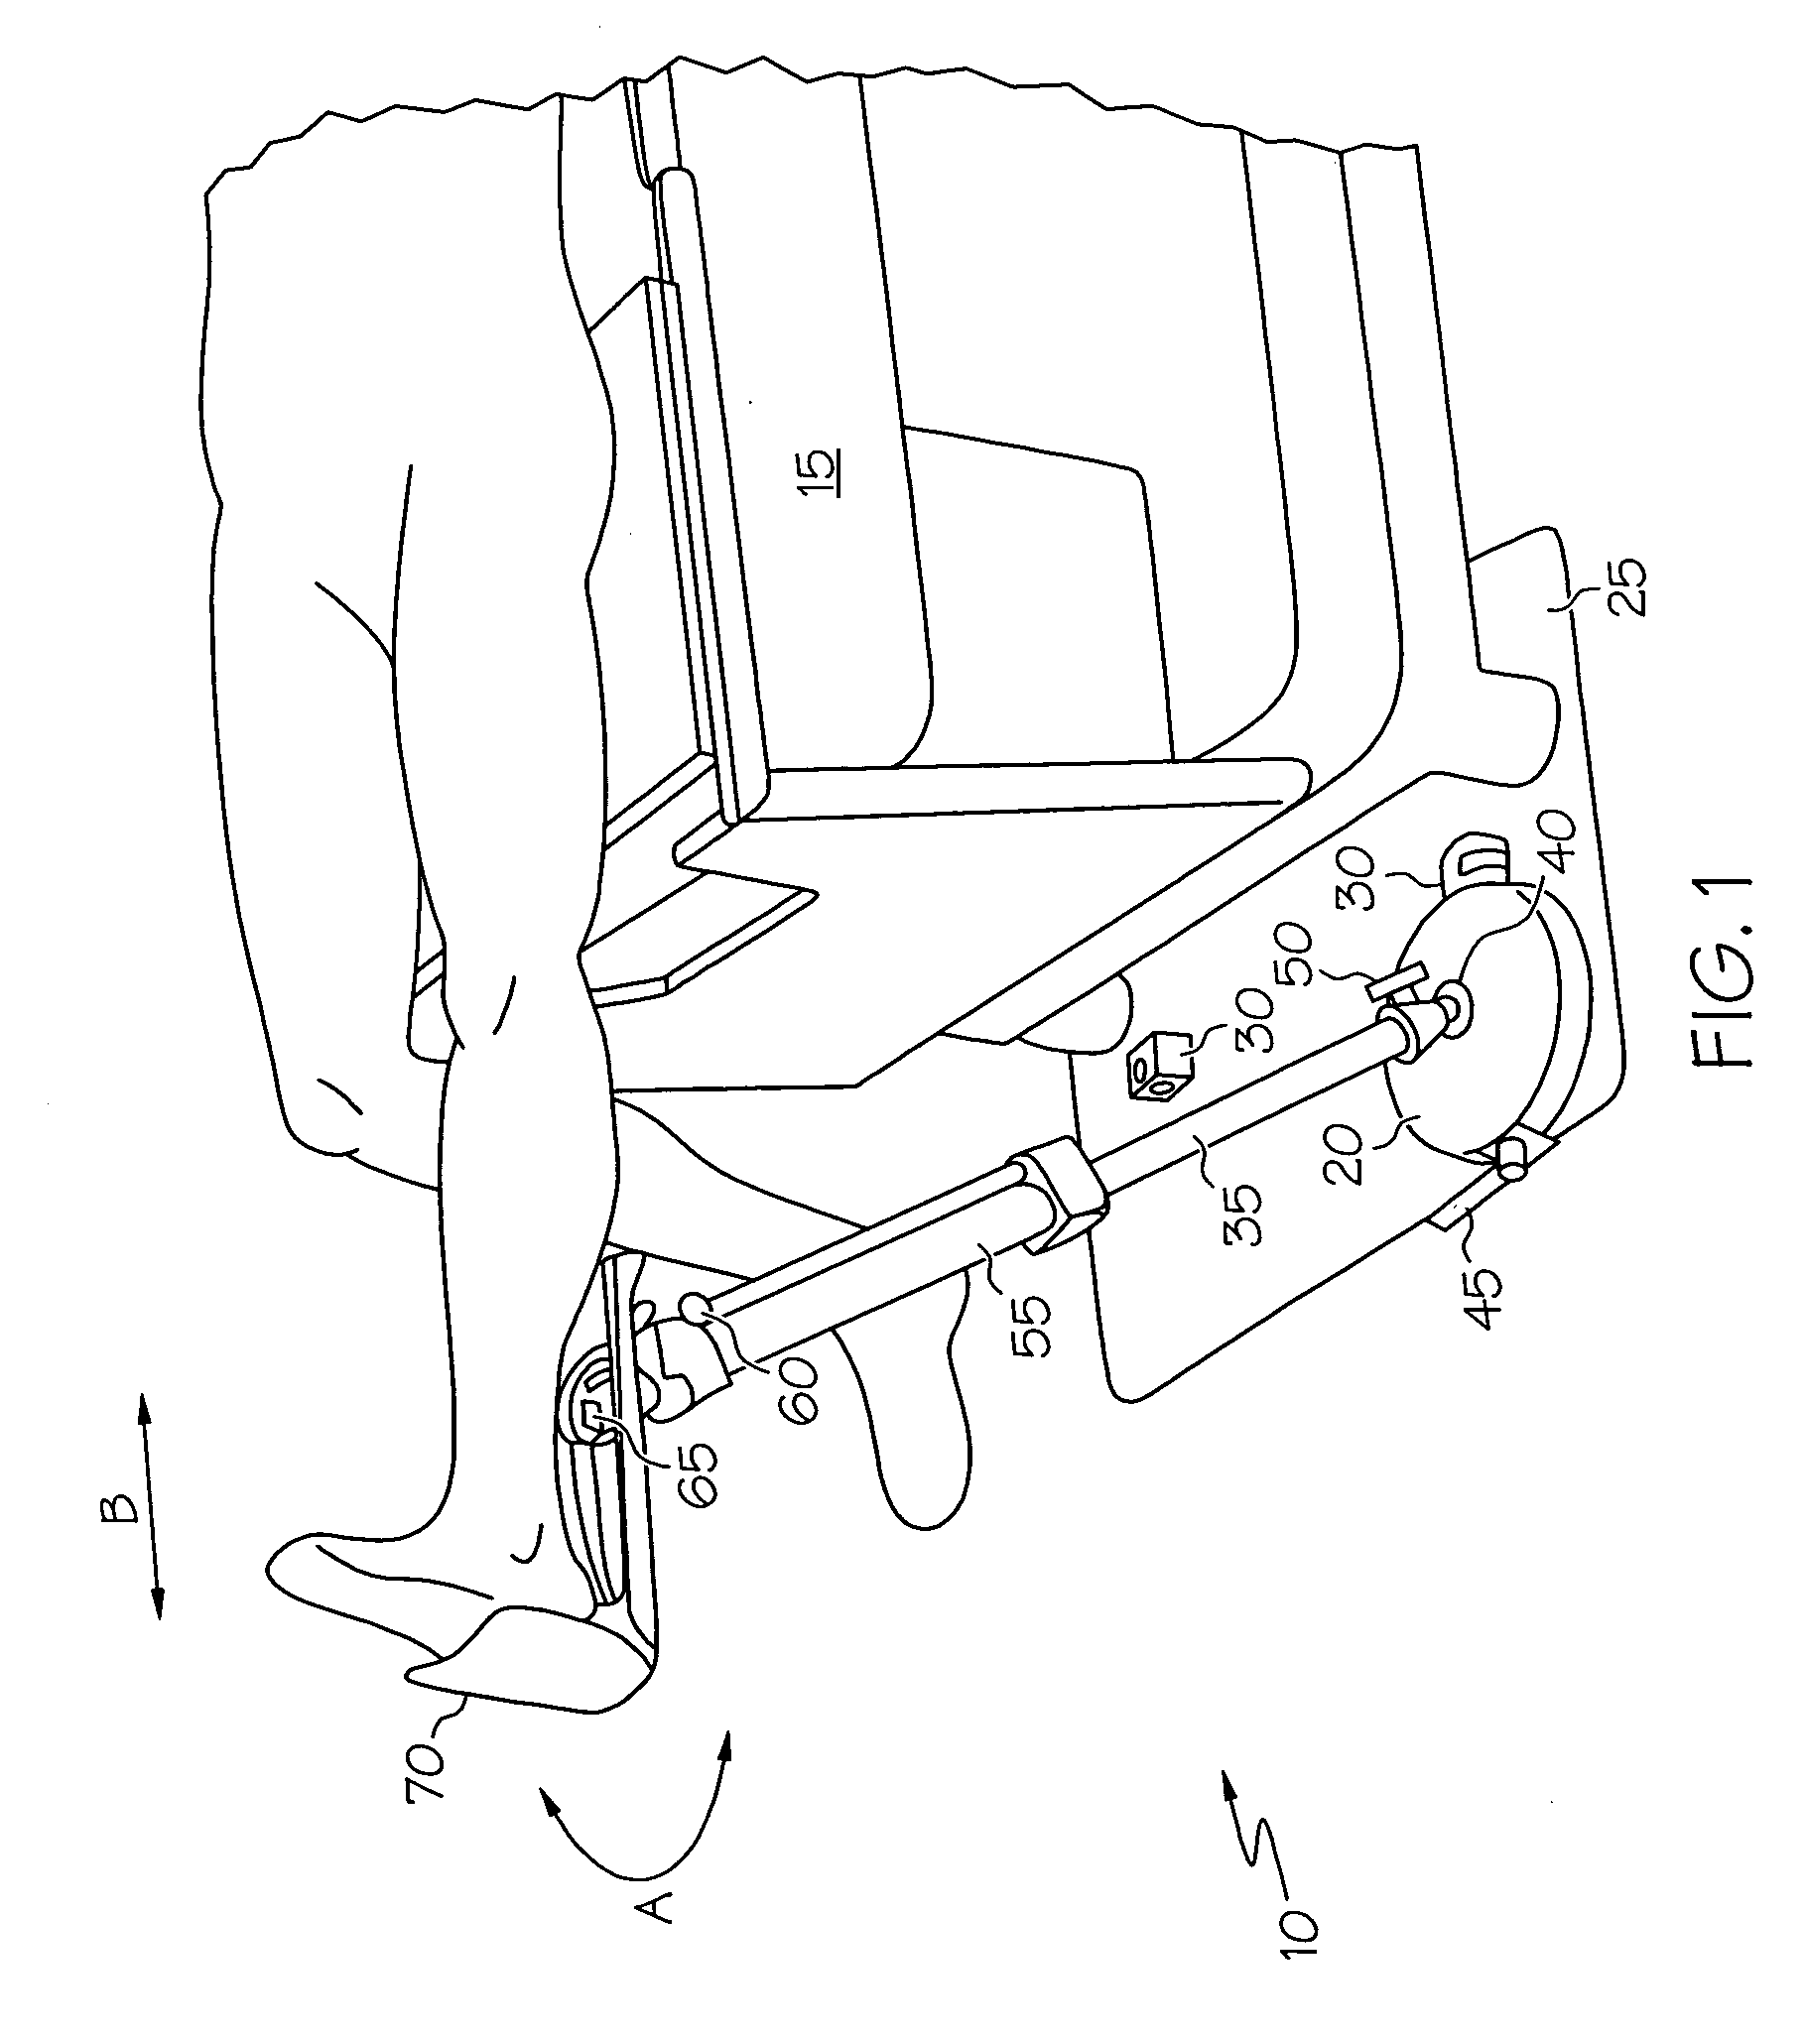 Surgical positioning apparatus